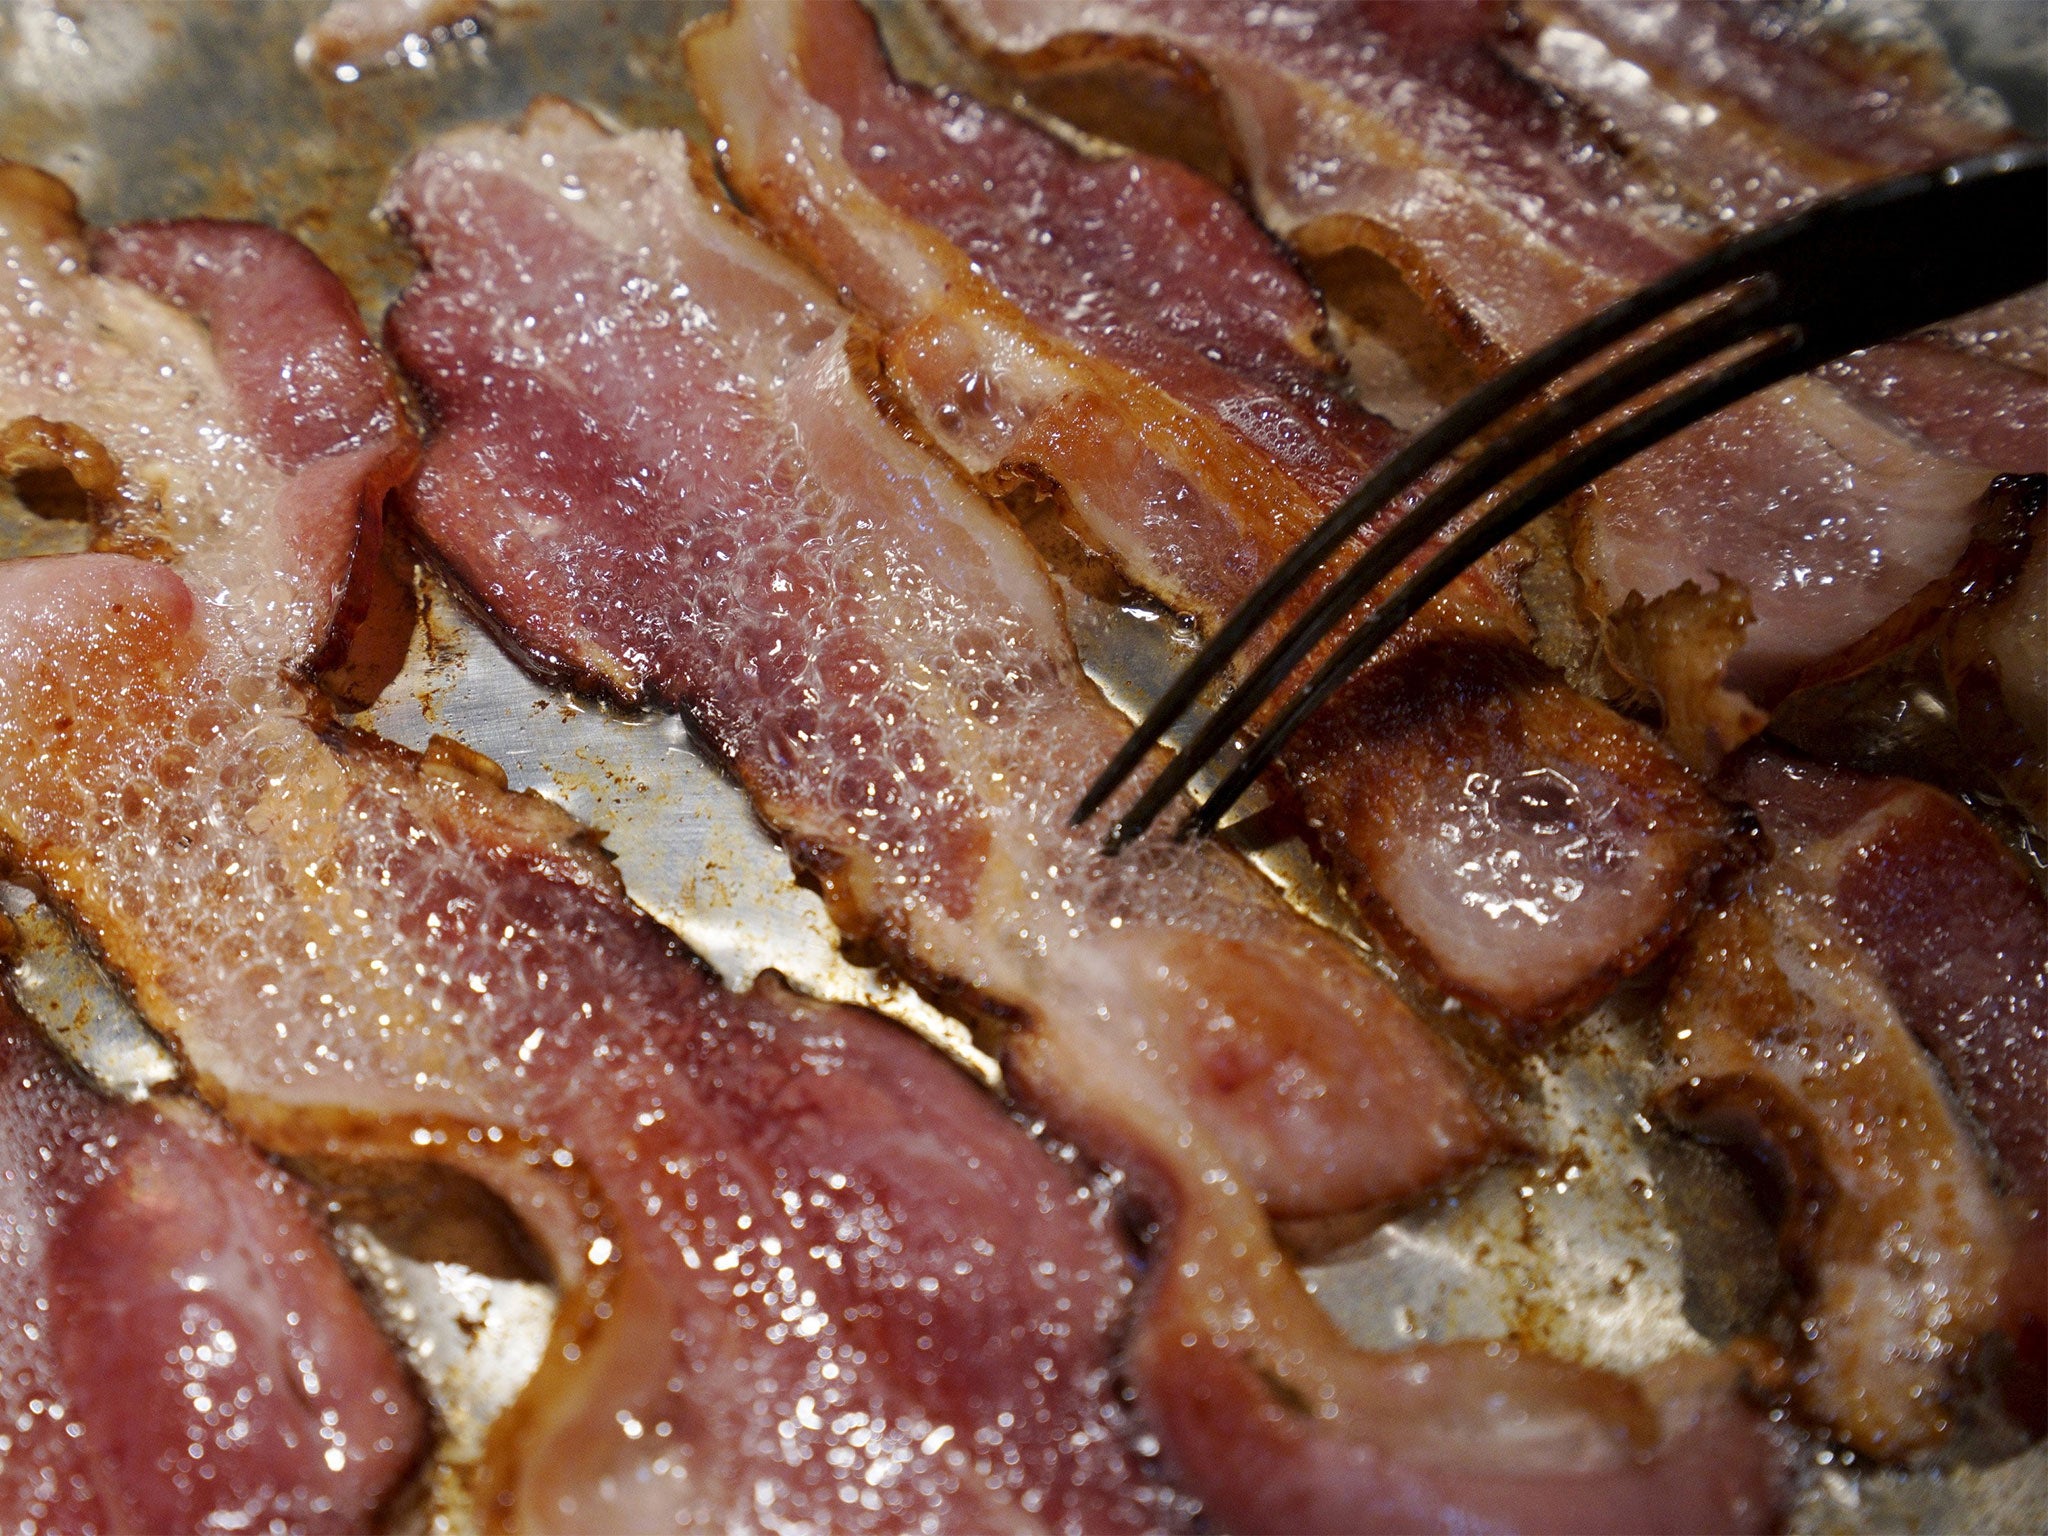 The WHO has added bacon to its list of items 'carcinogenic to humans'